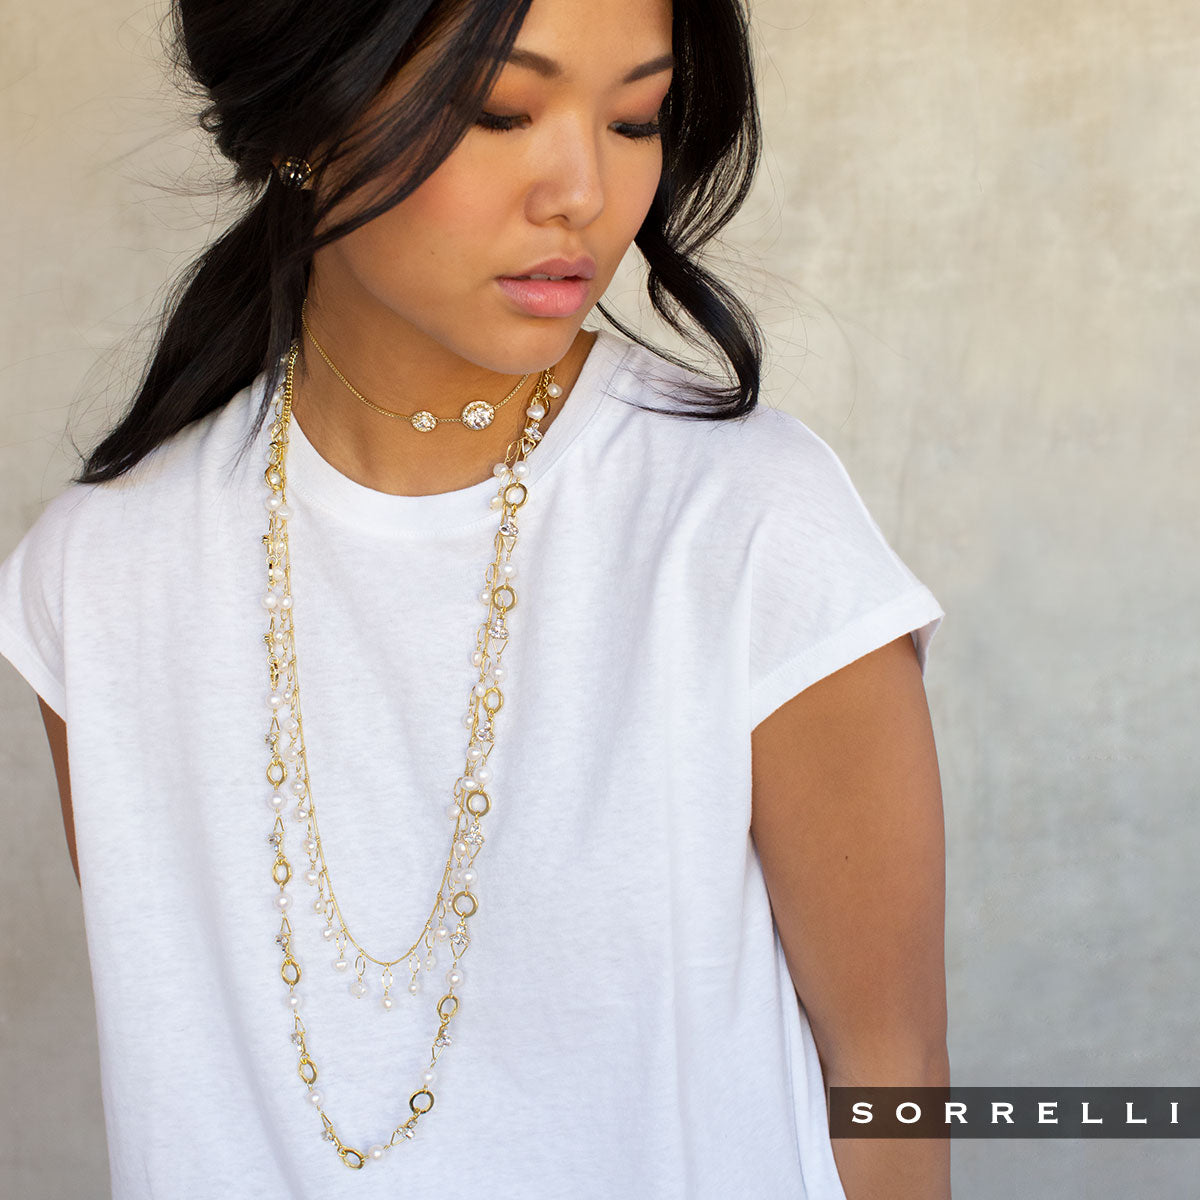 How To: Layer Necklaces - Simply by Simone